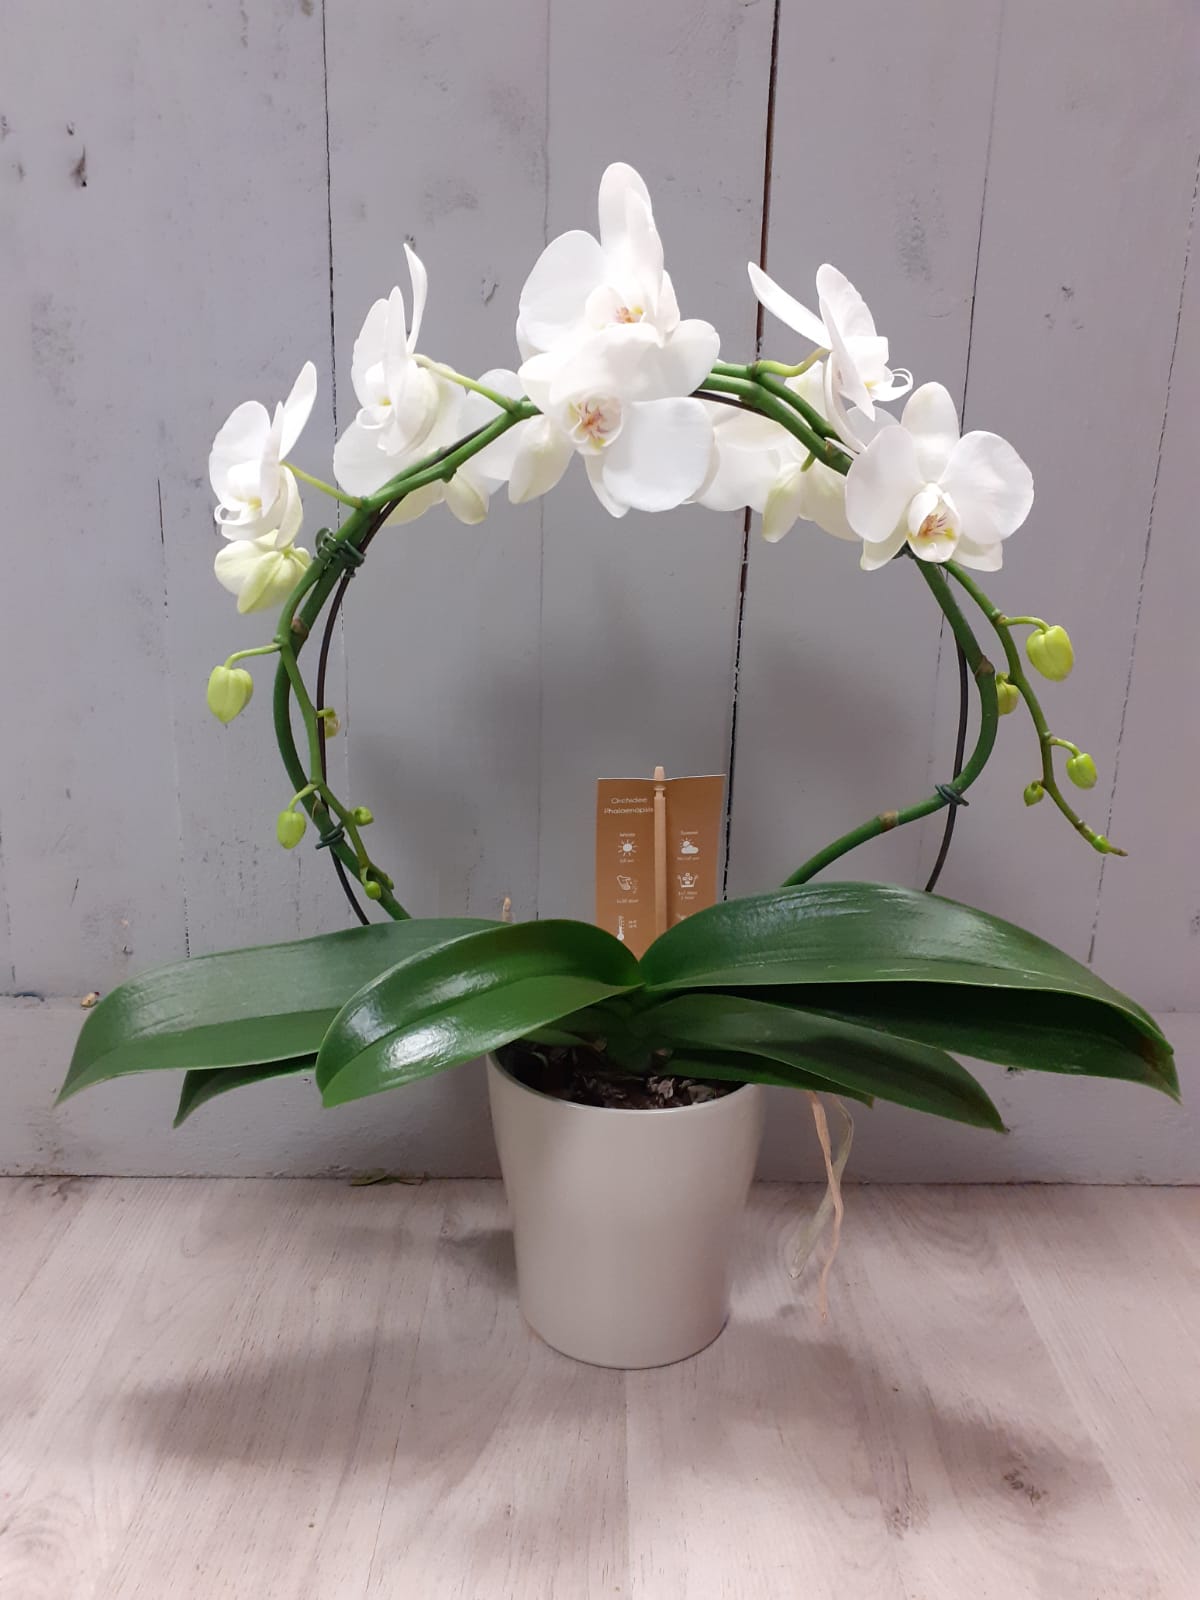 Deluxe White Orchid Plant in Ceramic Pot